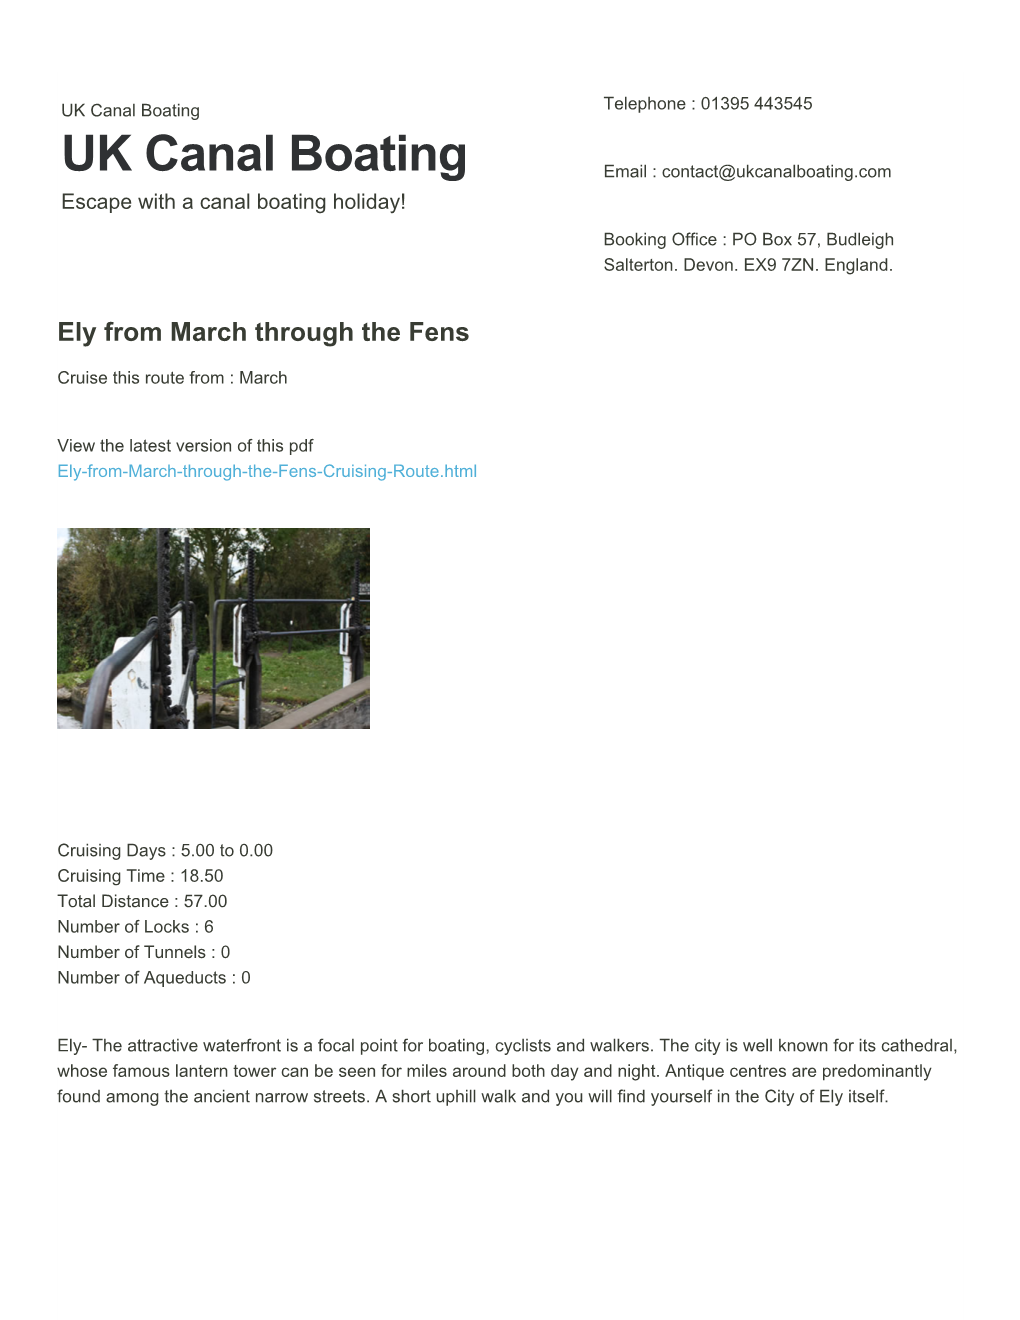 Ely from March Through the Fens | UK Canal Boating